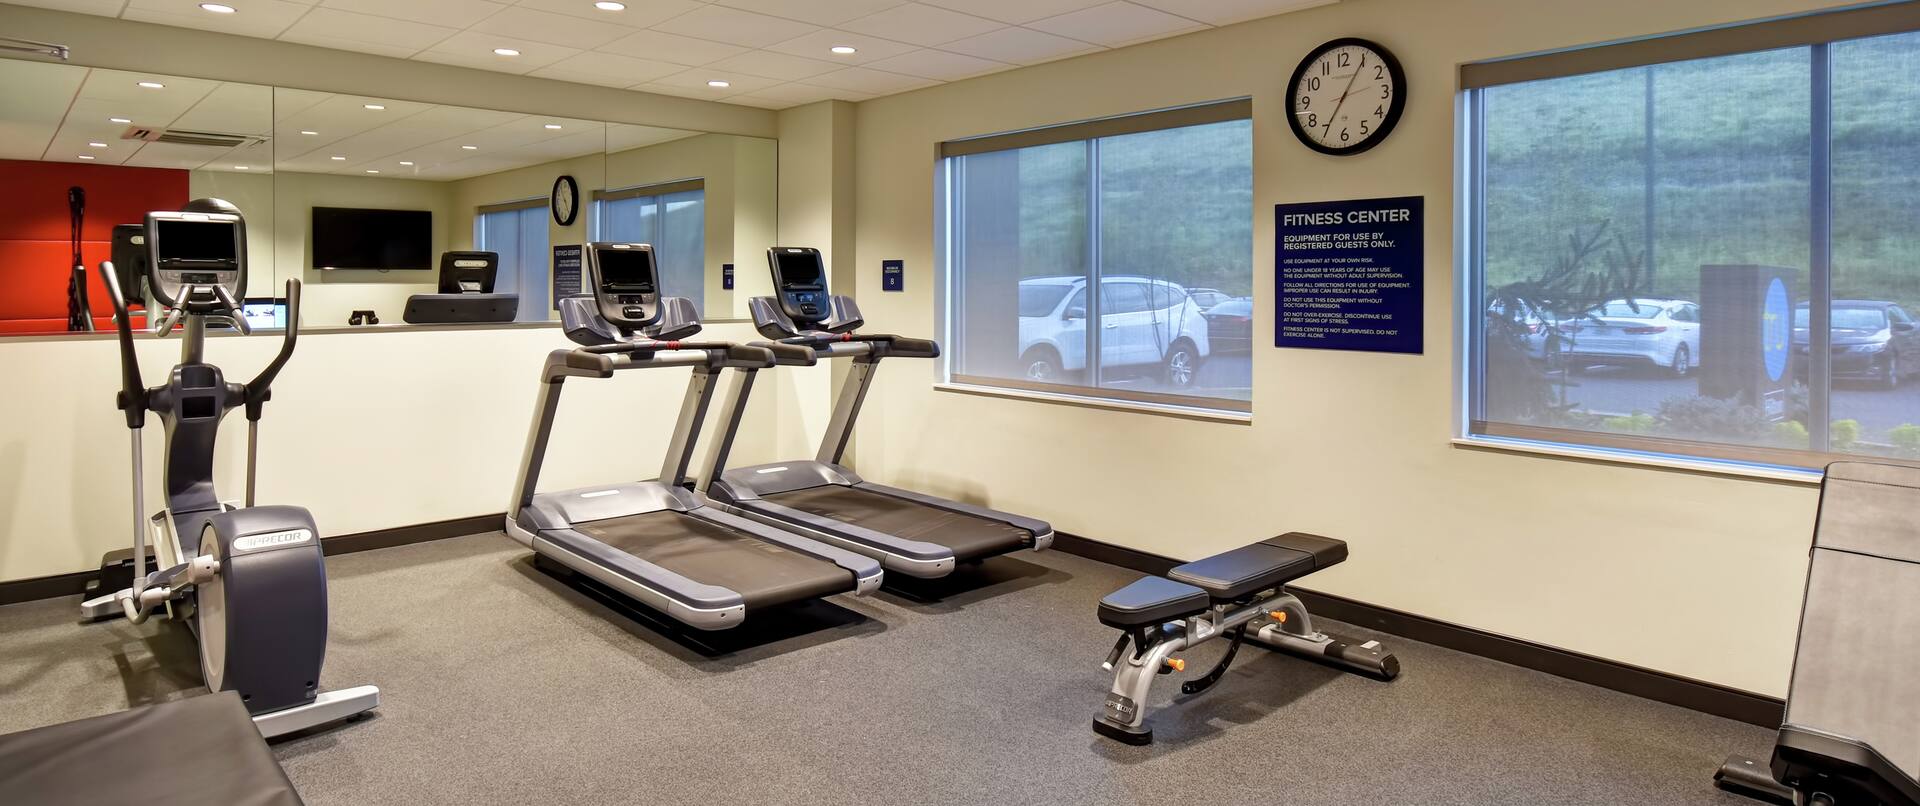 Fitness room with equipment and windows